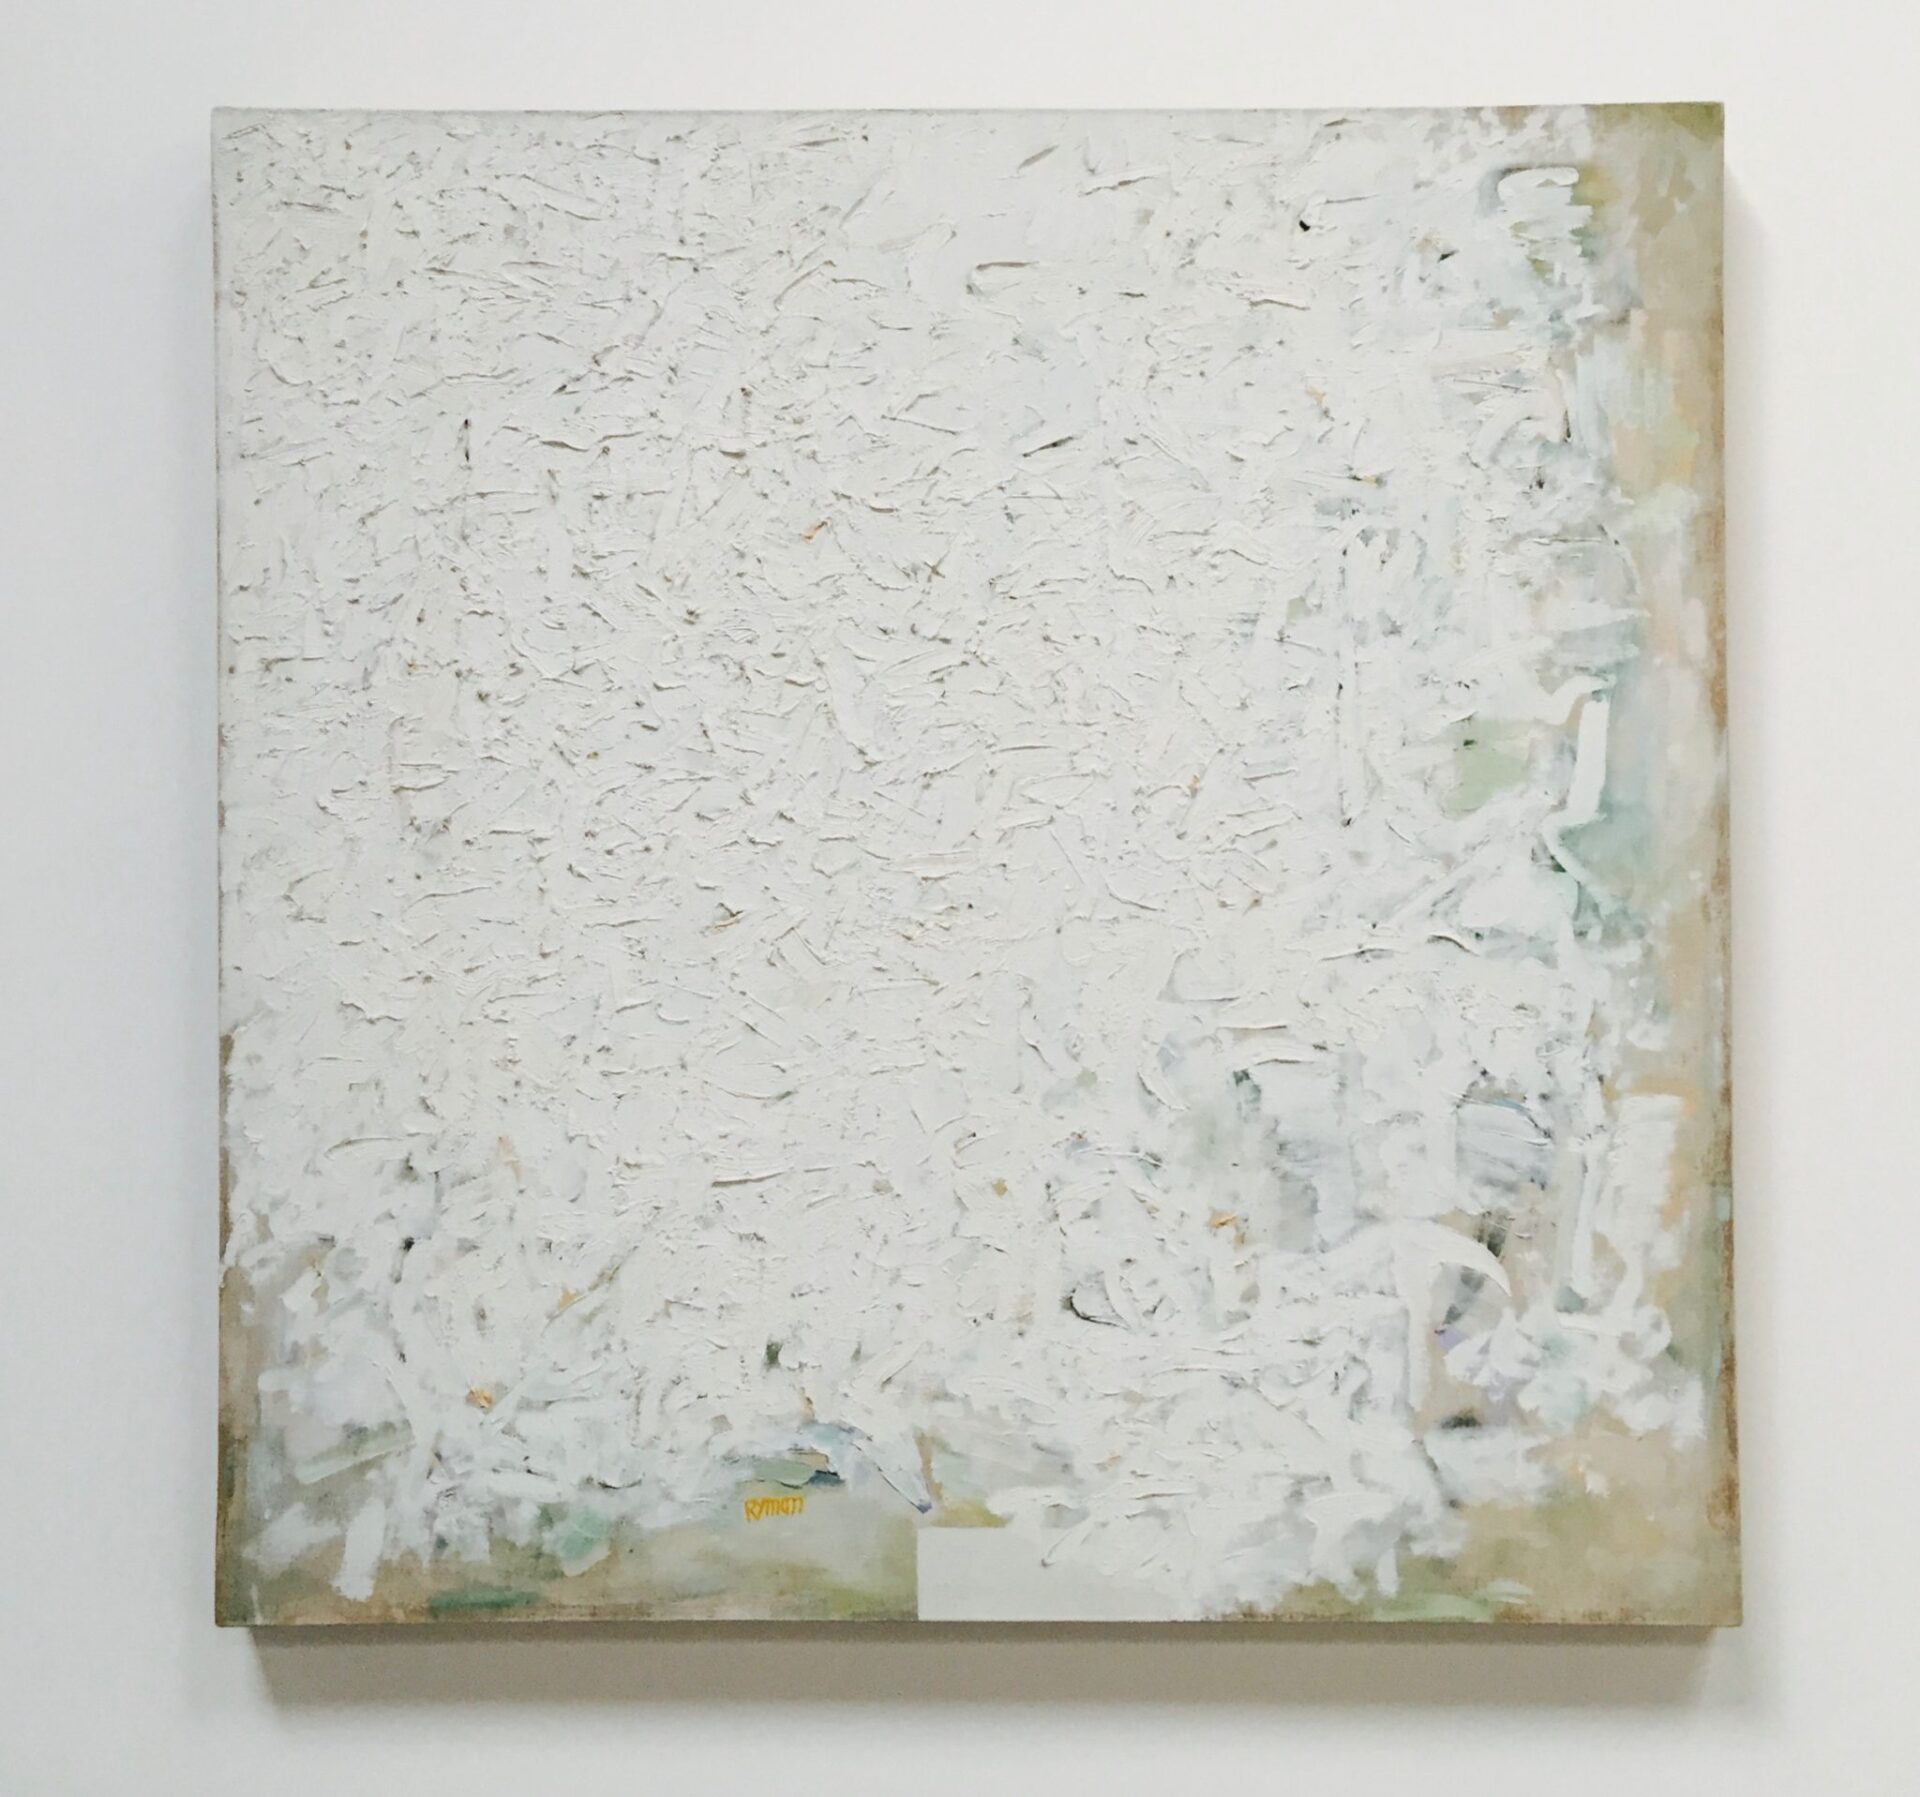 Robert Ryman. Untitled, c. 1960. Oil and gesso on linen. The Greenwich Collection, Ltd. On view at Dia:Chelsea, 545 West 22nd Street, December 9, 2015-June 18, 2016